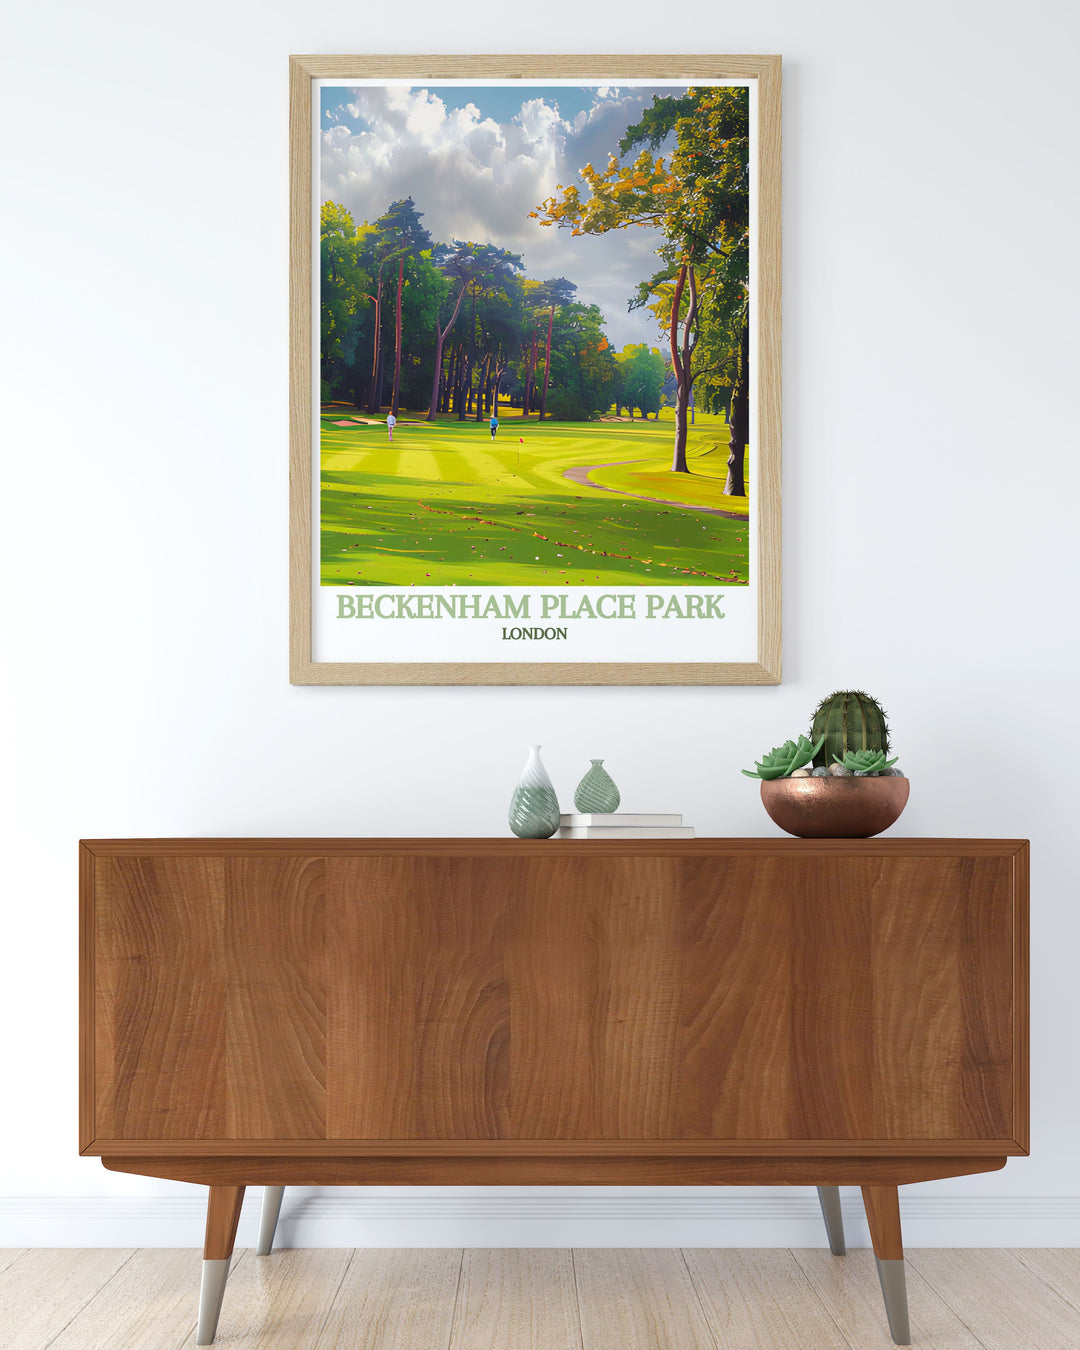 Vintage poster of Beckenham Place Park in London, featuring retro designs and classic illustrations that evoke nostalgia and adventure, celebrating the parks historical charm and timeless appeal, perfect for vintage art collectors and travel enthusiasts.